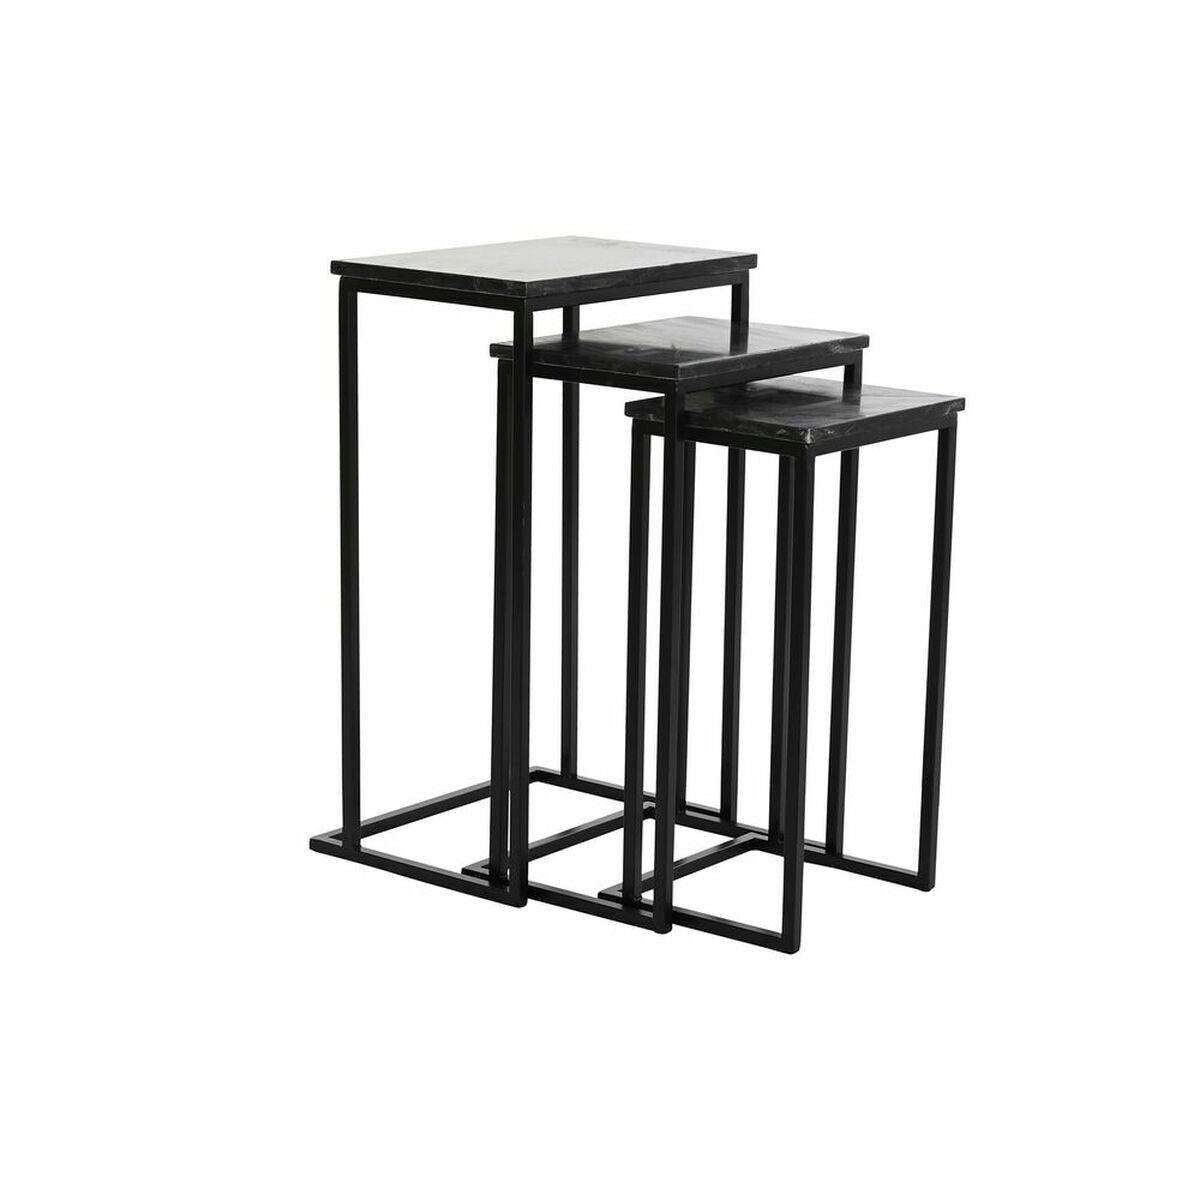 Set of 3 Side Tables in Black Marble and Black Metal Legs (40 x 26 x 65 cm)